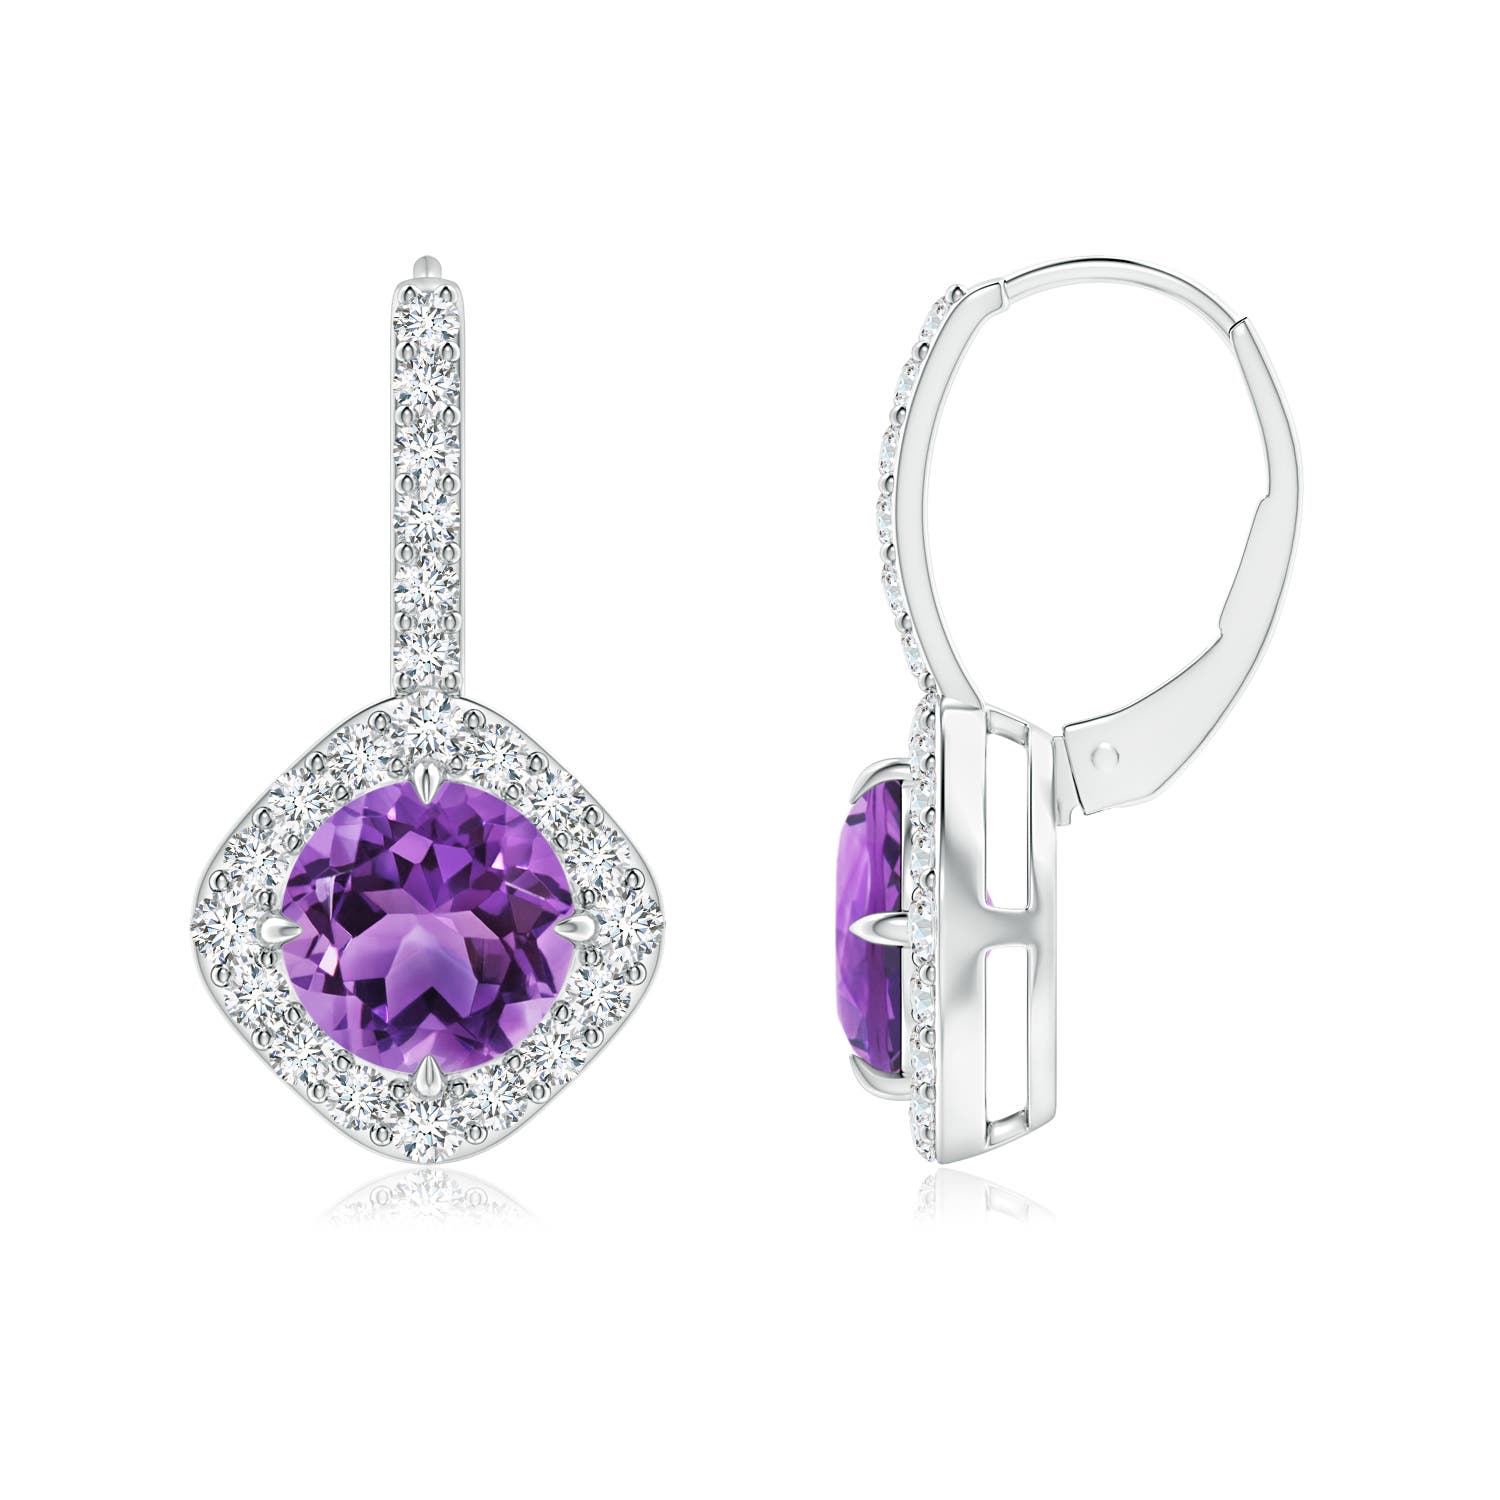 AA - Amethyst / 2.85 CT / 14 KT White Gold